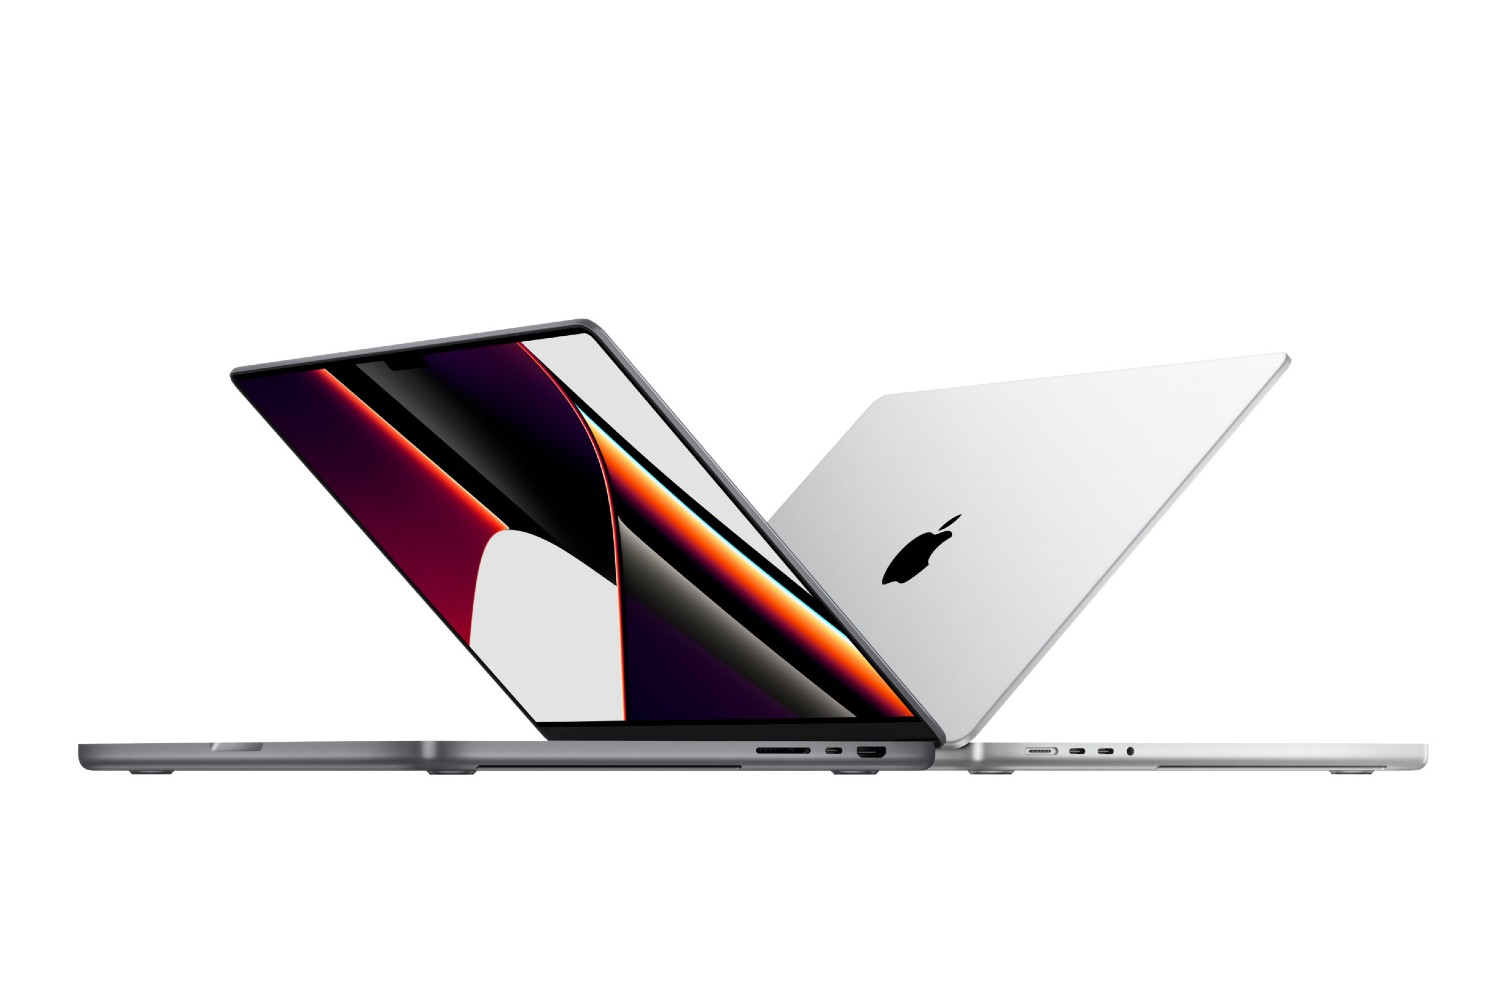 Apple MacBook Pro 14-inch and 16-inch product shots